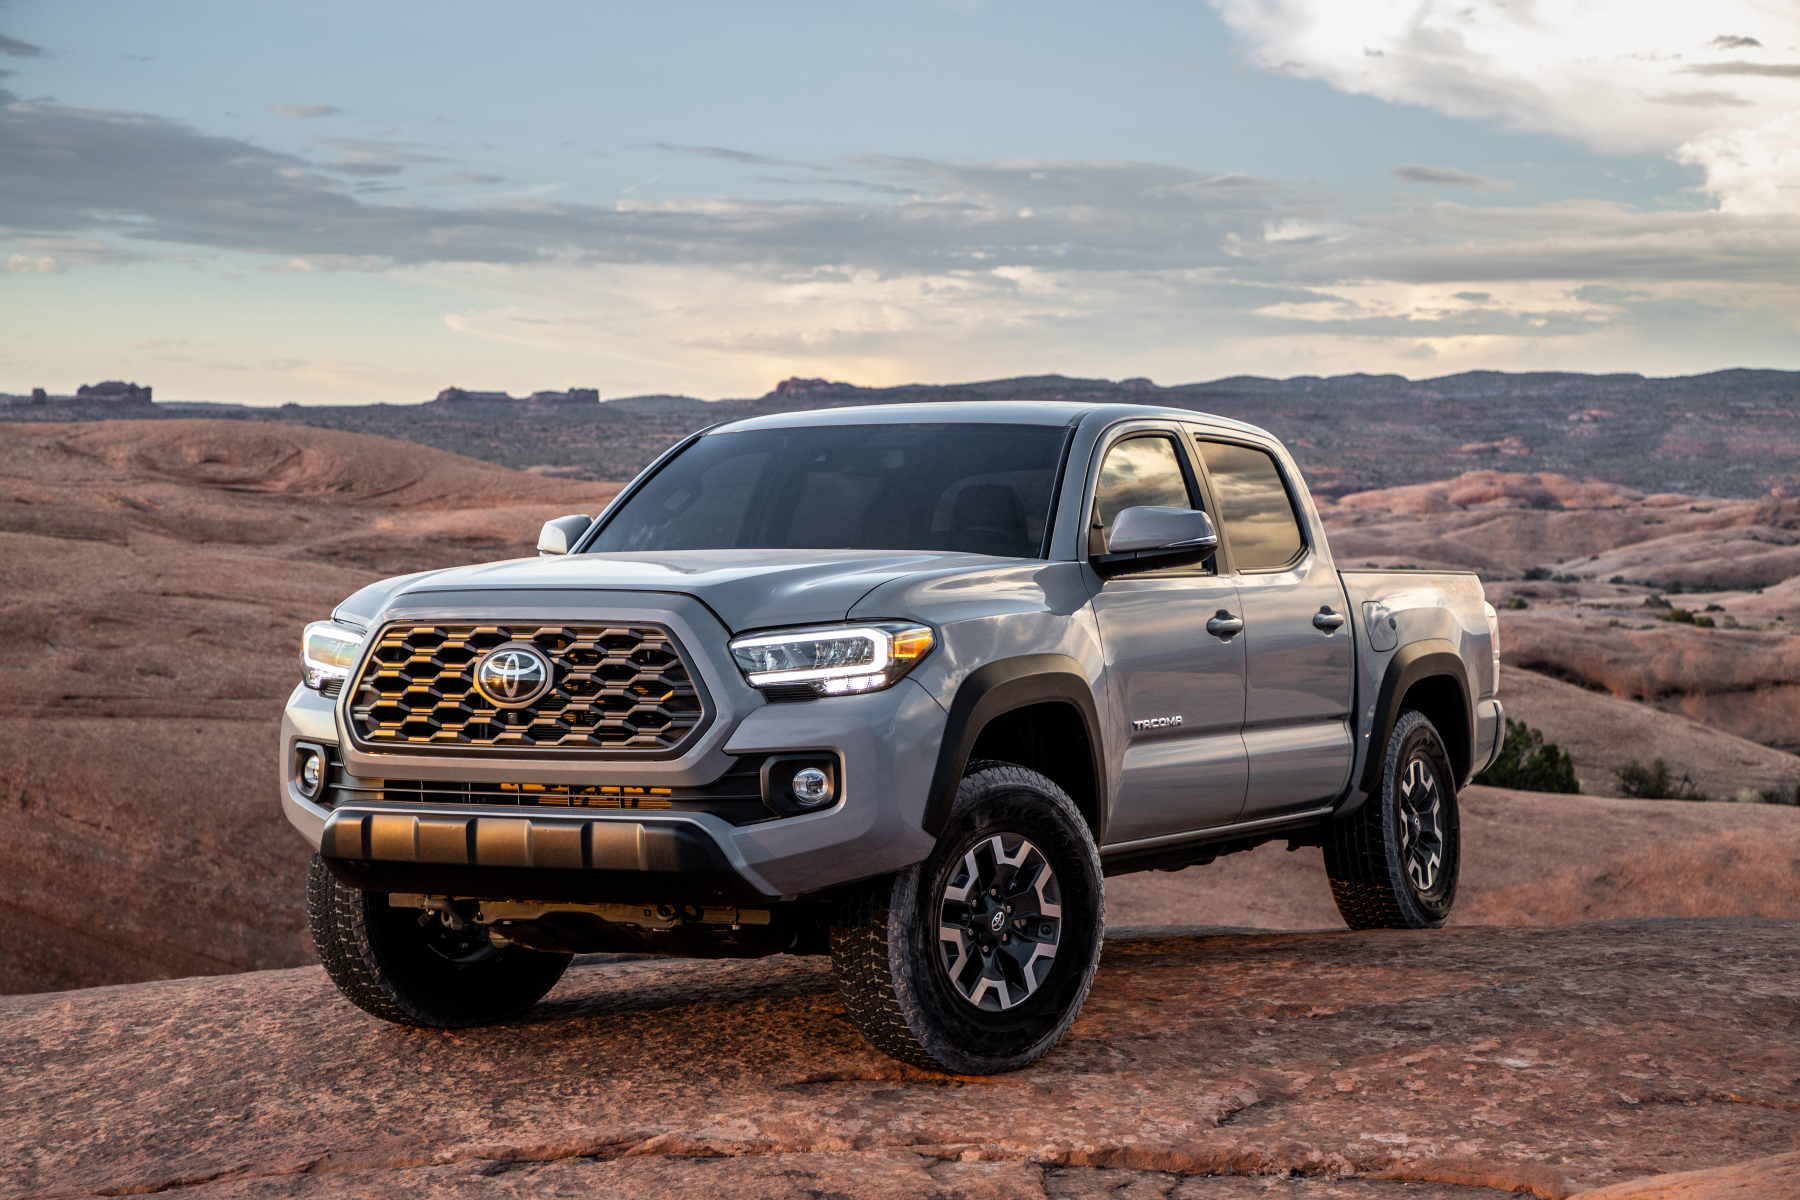 A silver 2020 Toyota Tacoma compact pickup truck parked on display